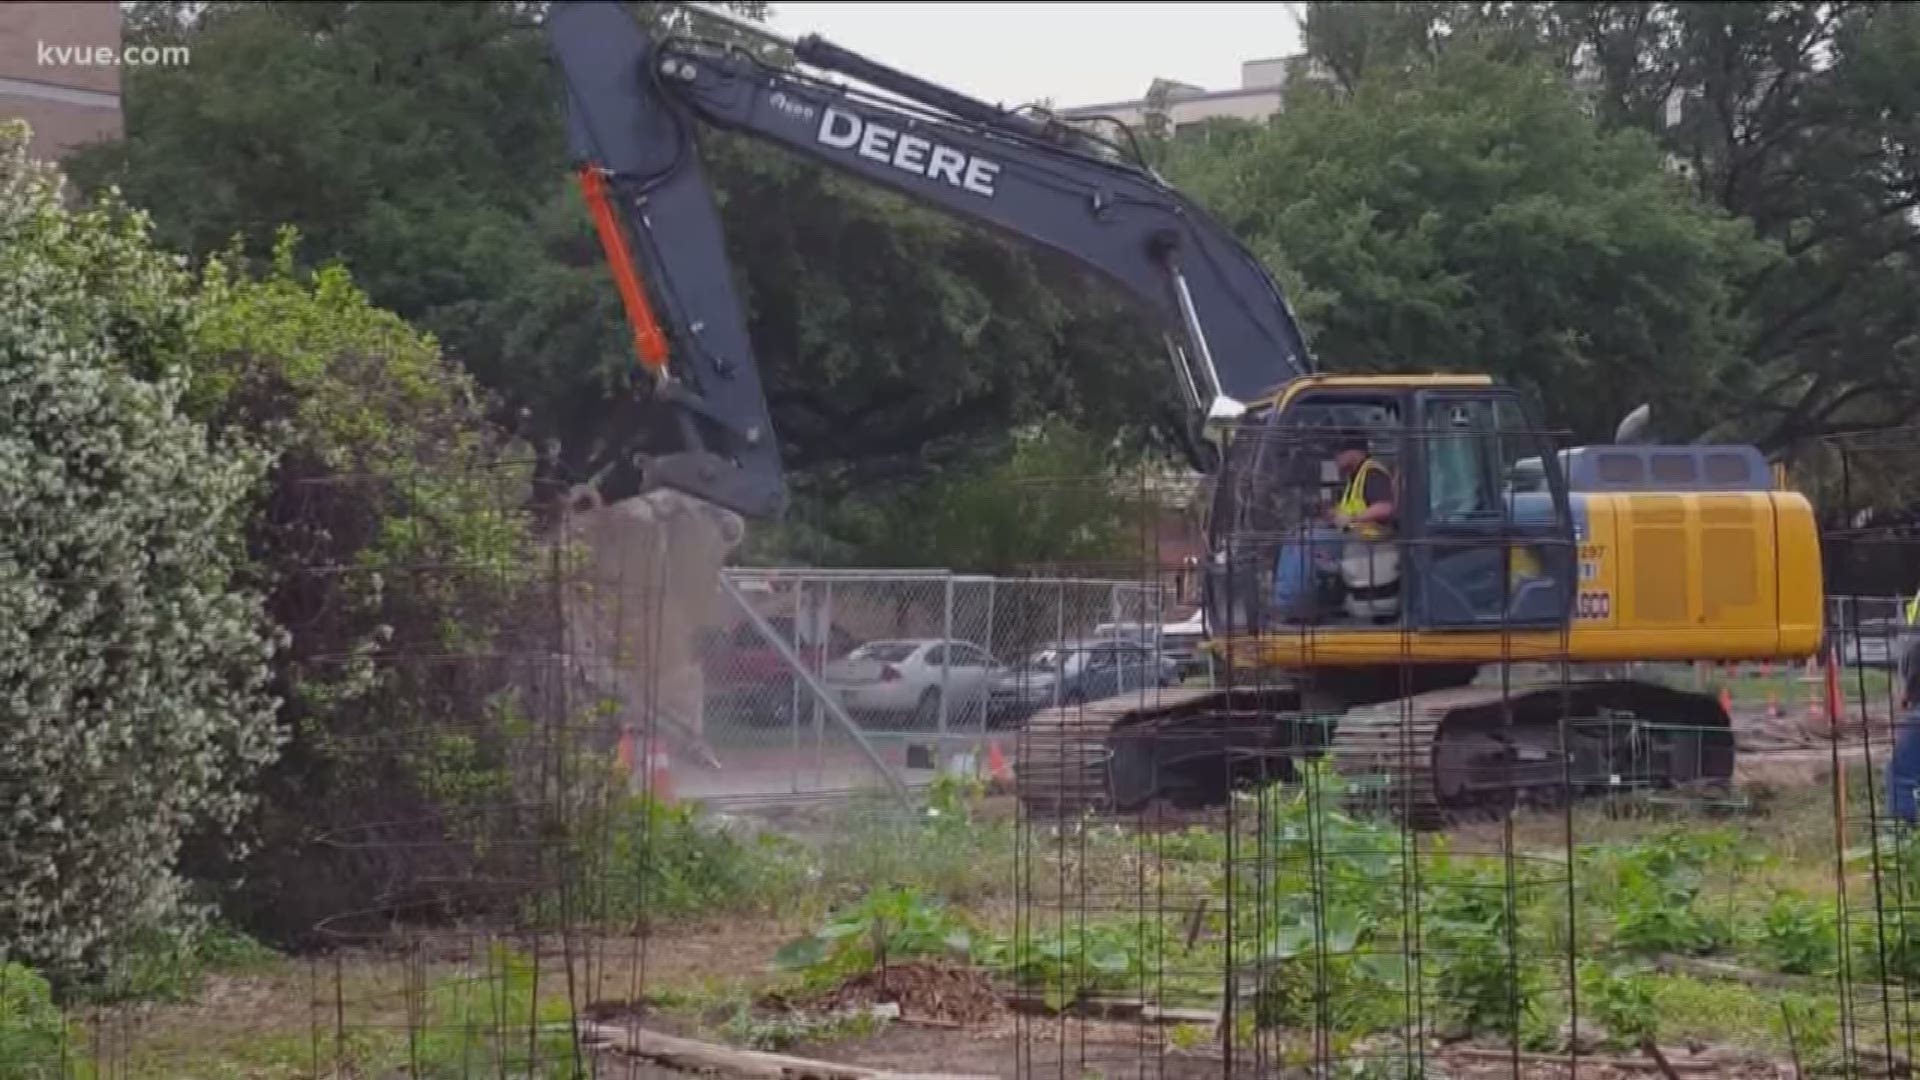 A developer is tearing it down, and neighbors say they were caught off guard by the move.